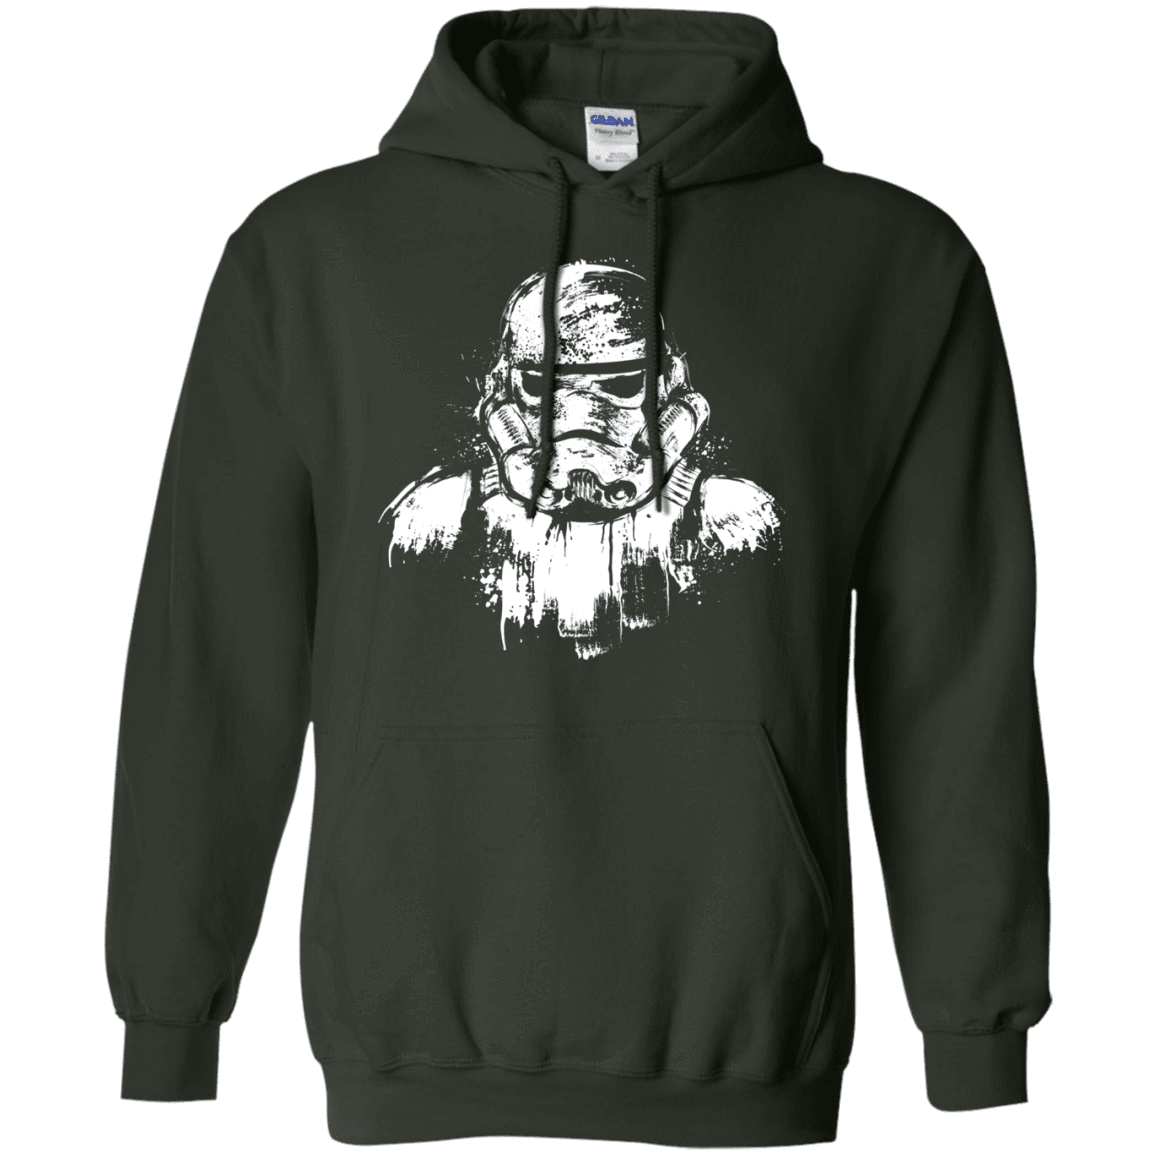 Sweatshirts Forest Green / Small STORMTROOPER ARMOR Pullover Hoodie